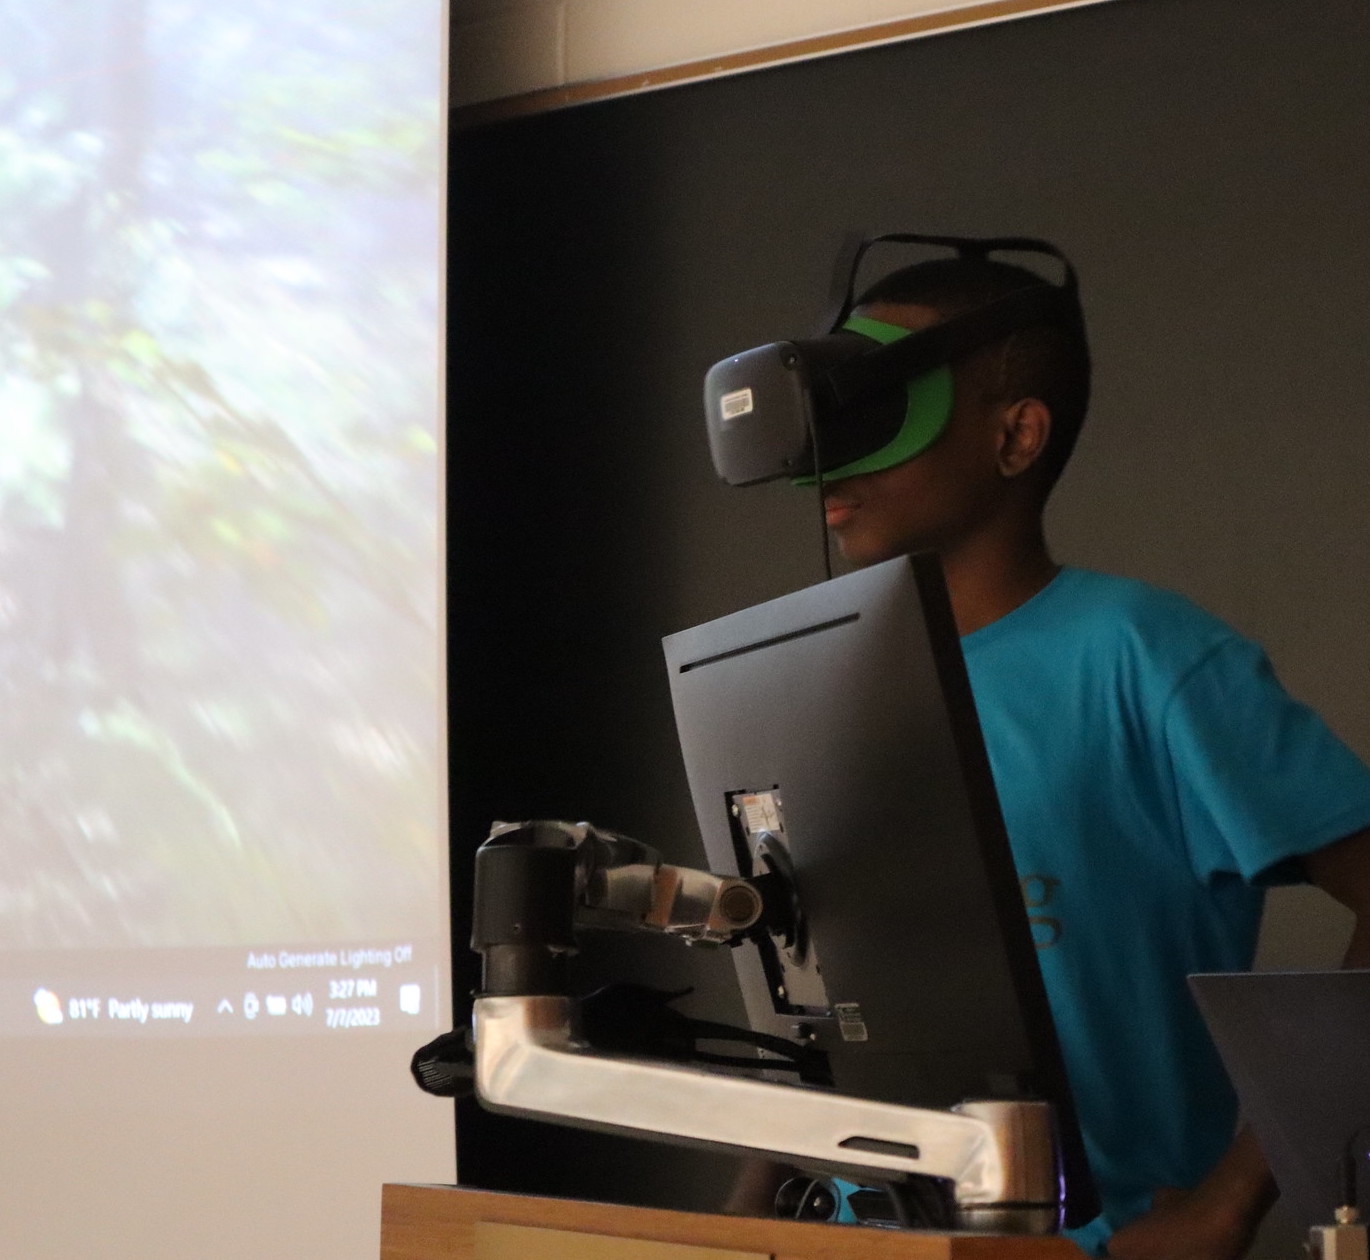 A Green Corps student using a VR headset and hand controls to explore a virtual forest developed by the Forest + Climate Visualization Partnership.